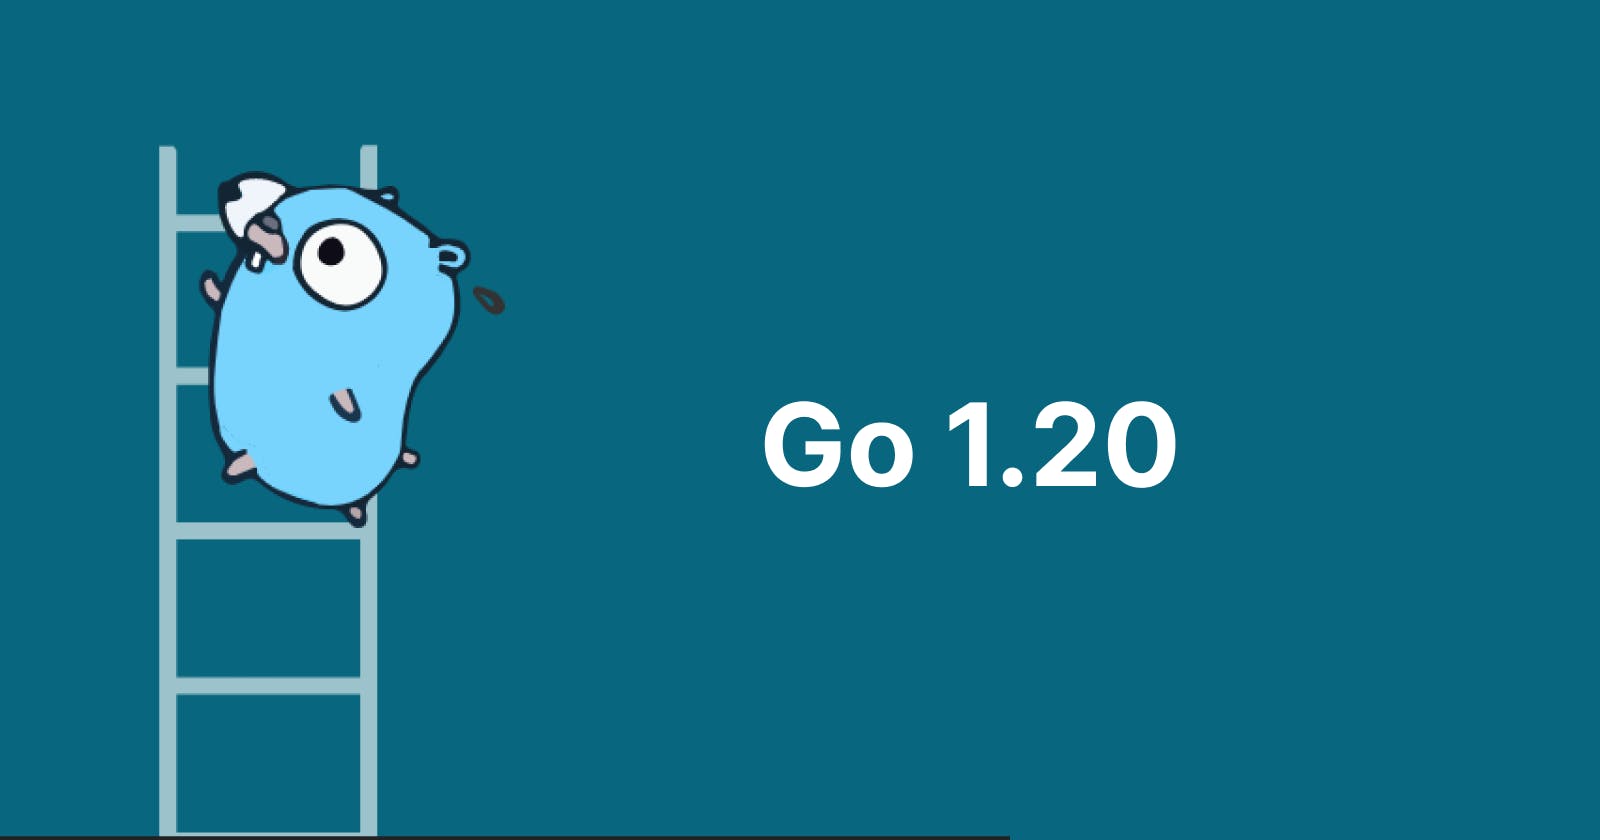 What's new in Golang 1.20